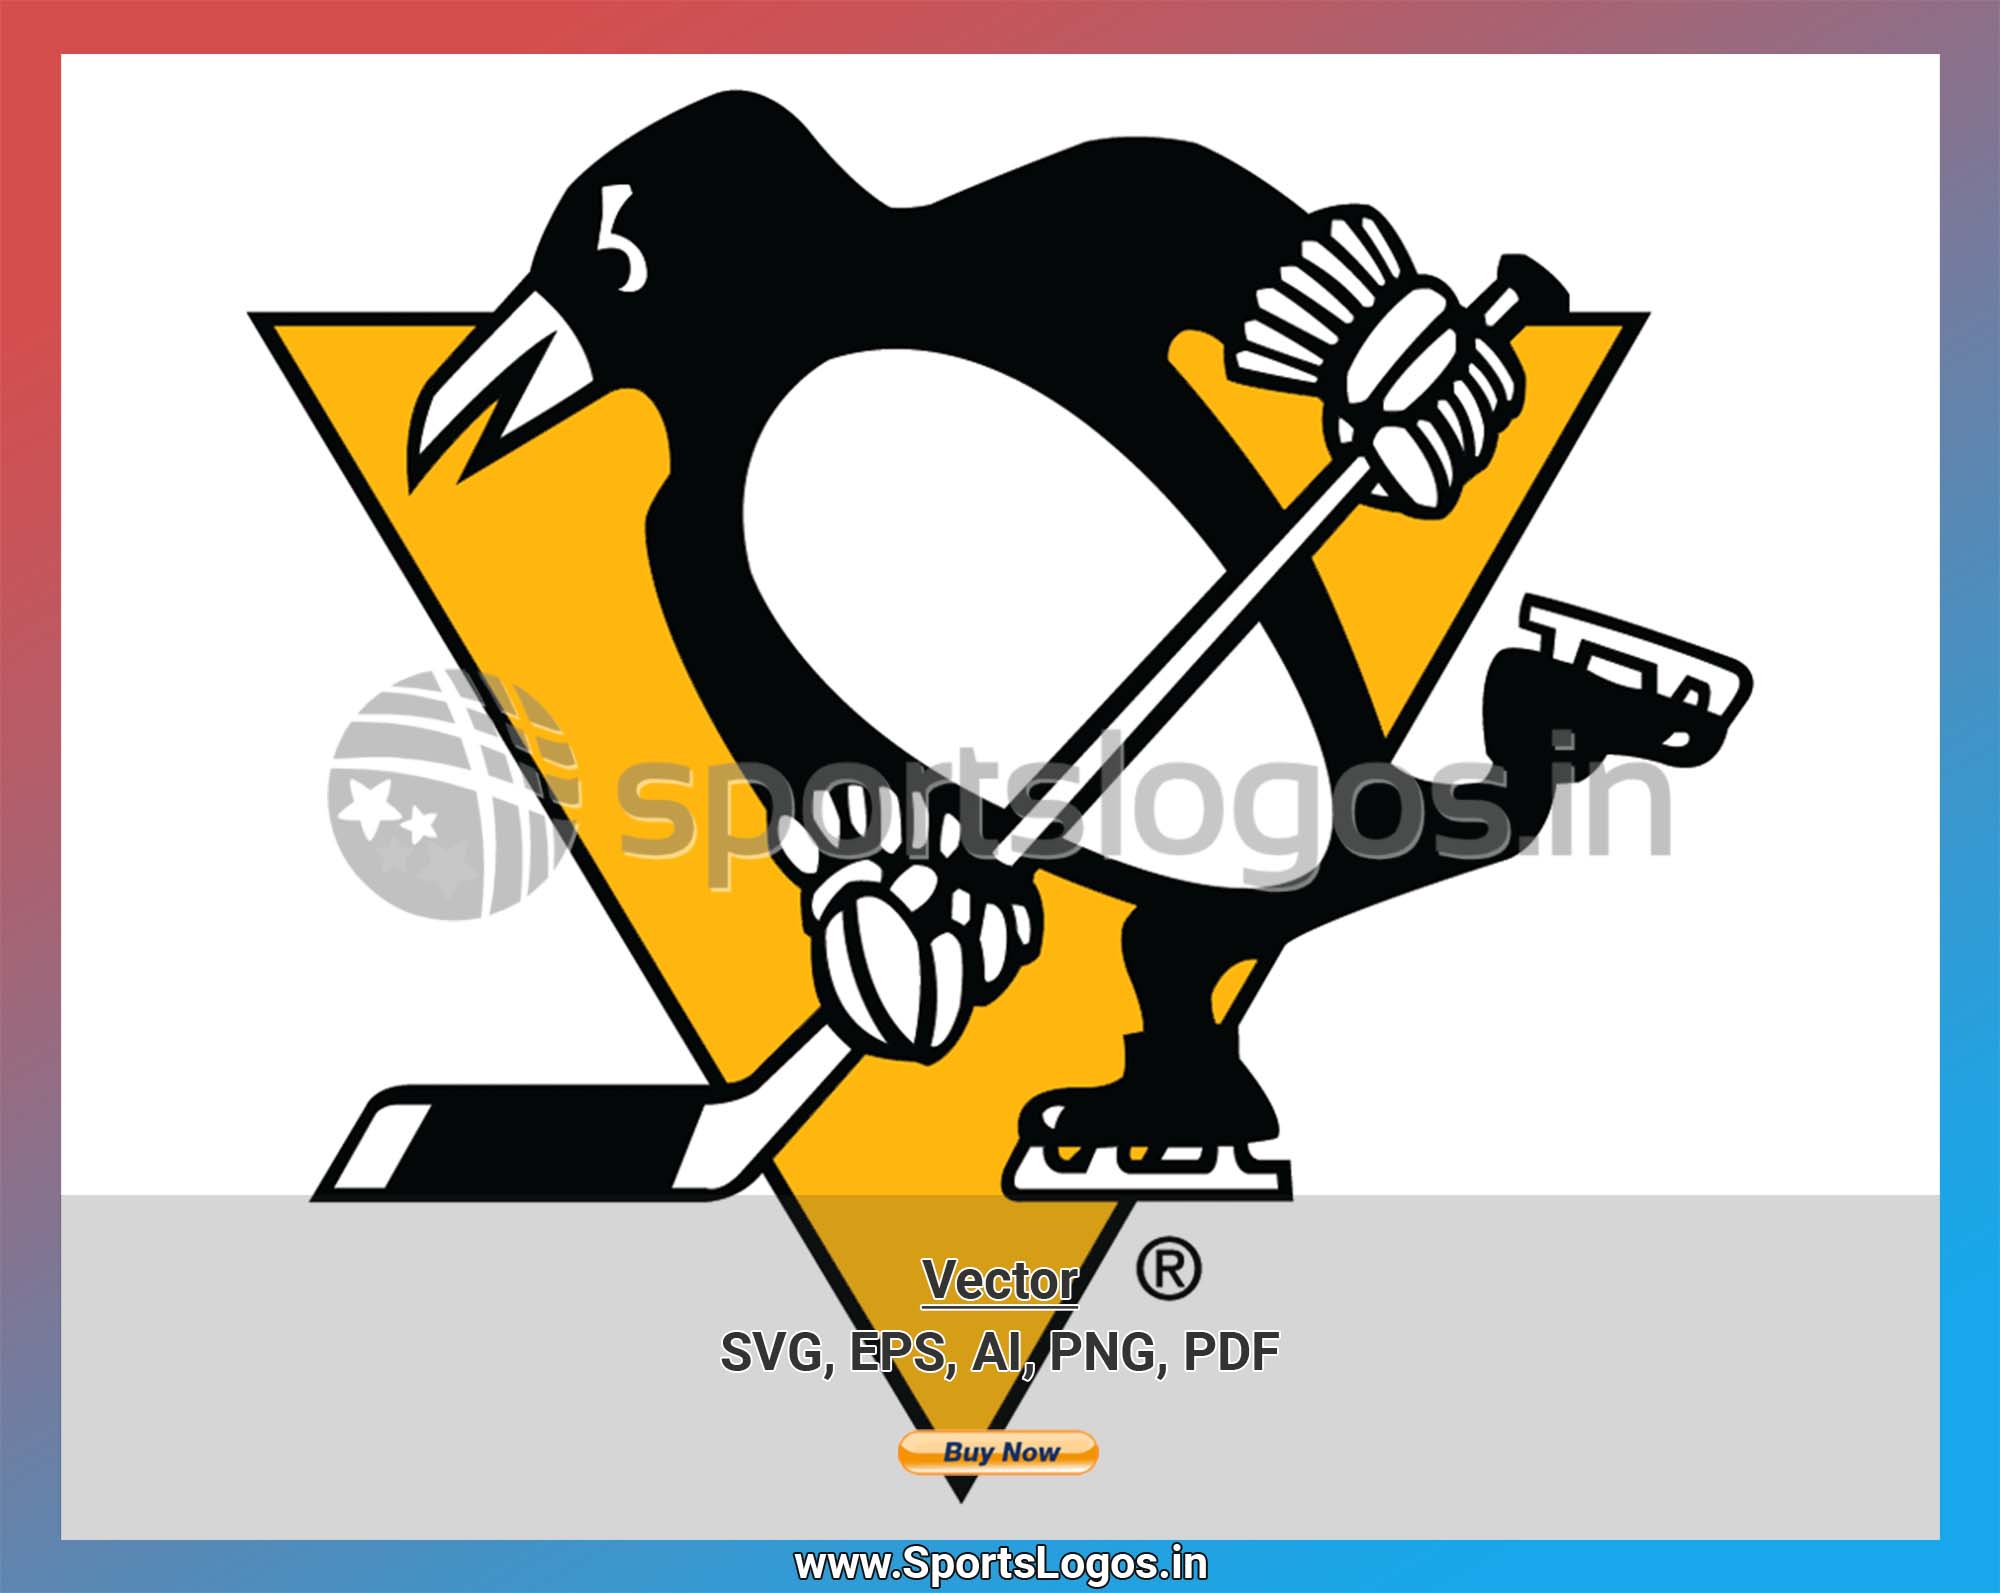 Penguins hockey jersey template.eps Royalty Free Stock SVG Vector